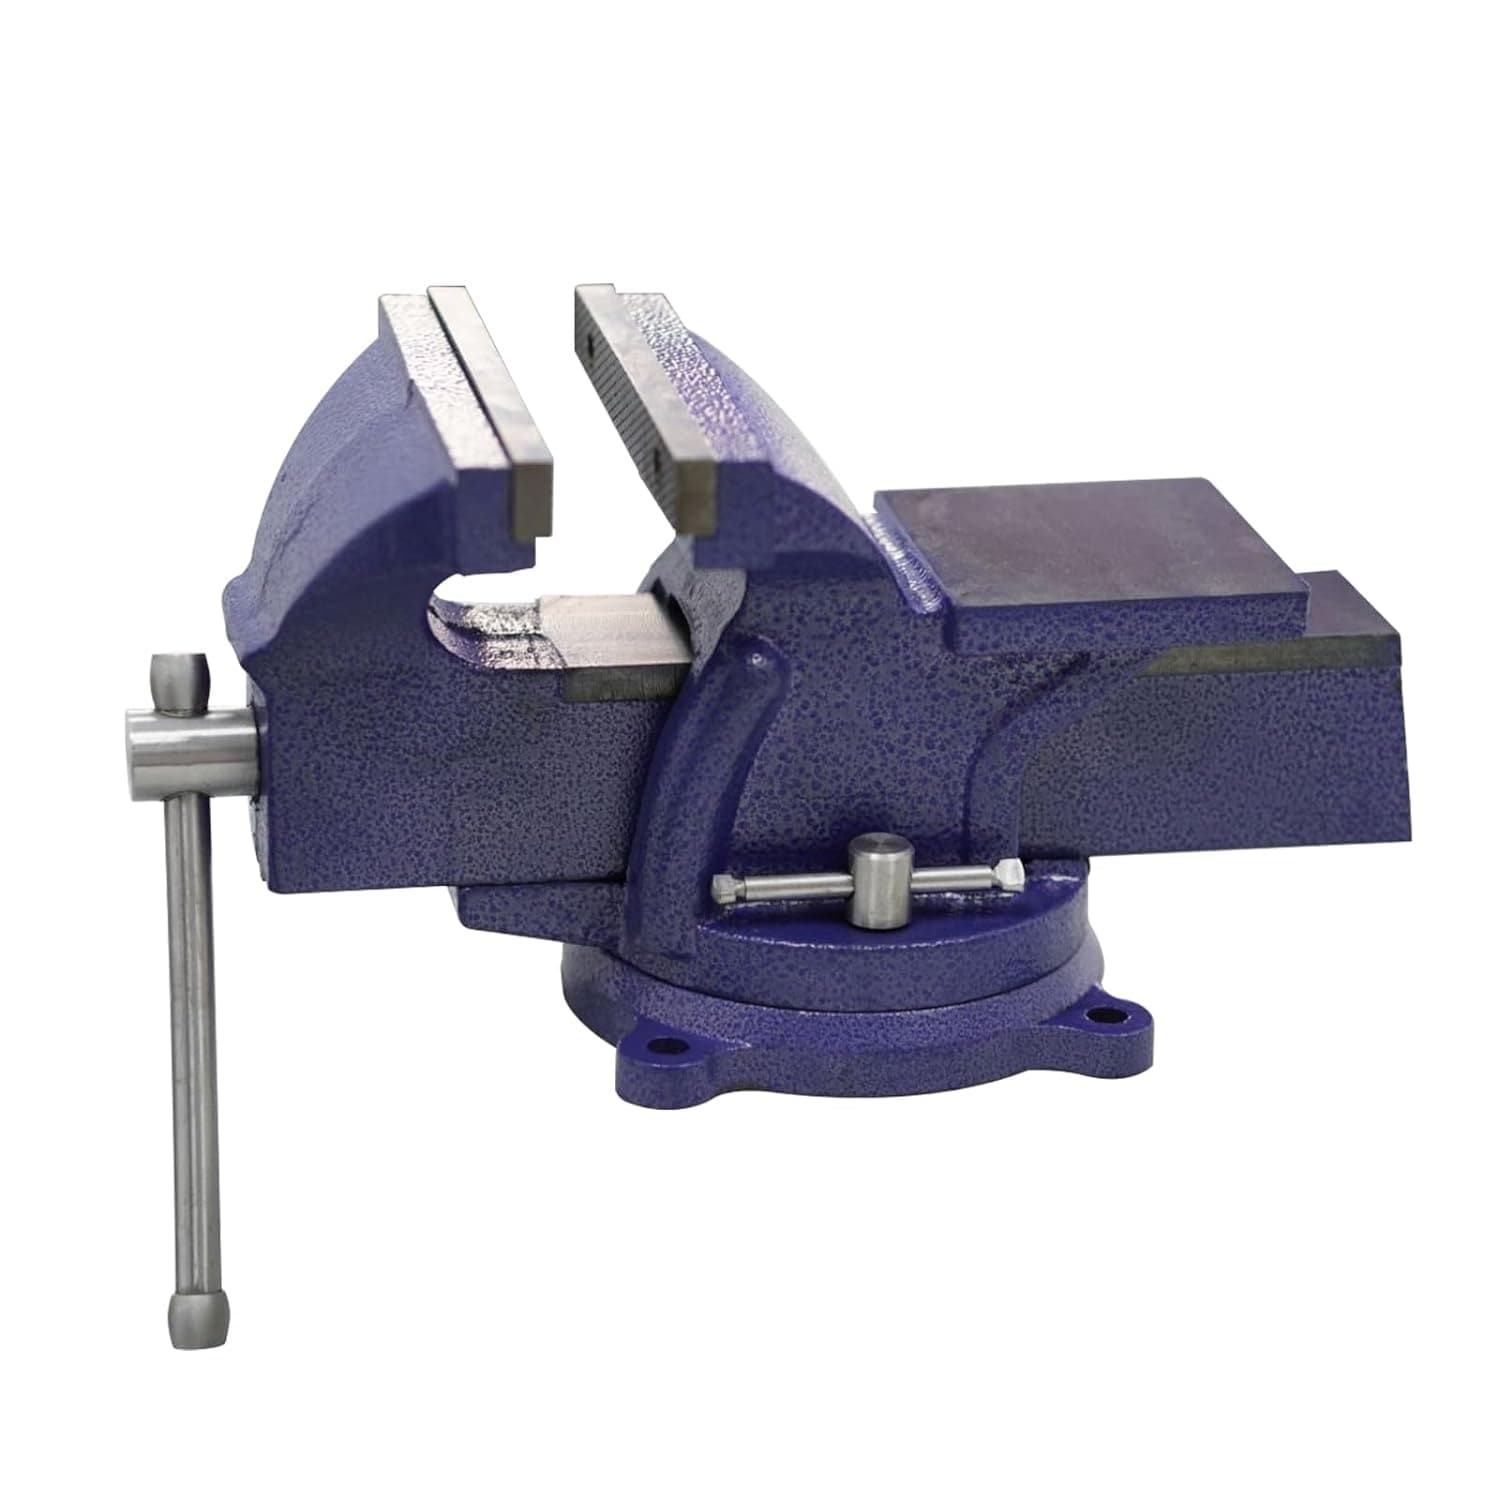 6 Bench Vise, Table Vise Clamp On with 360° Swivel Base, Heavy